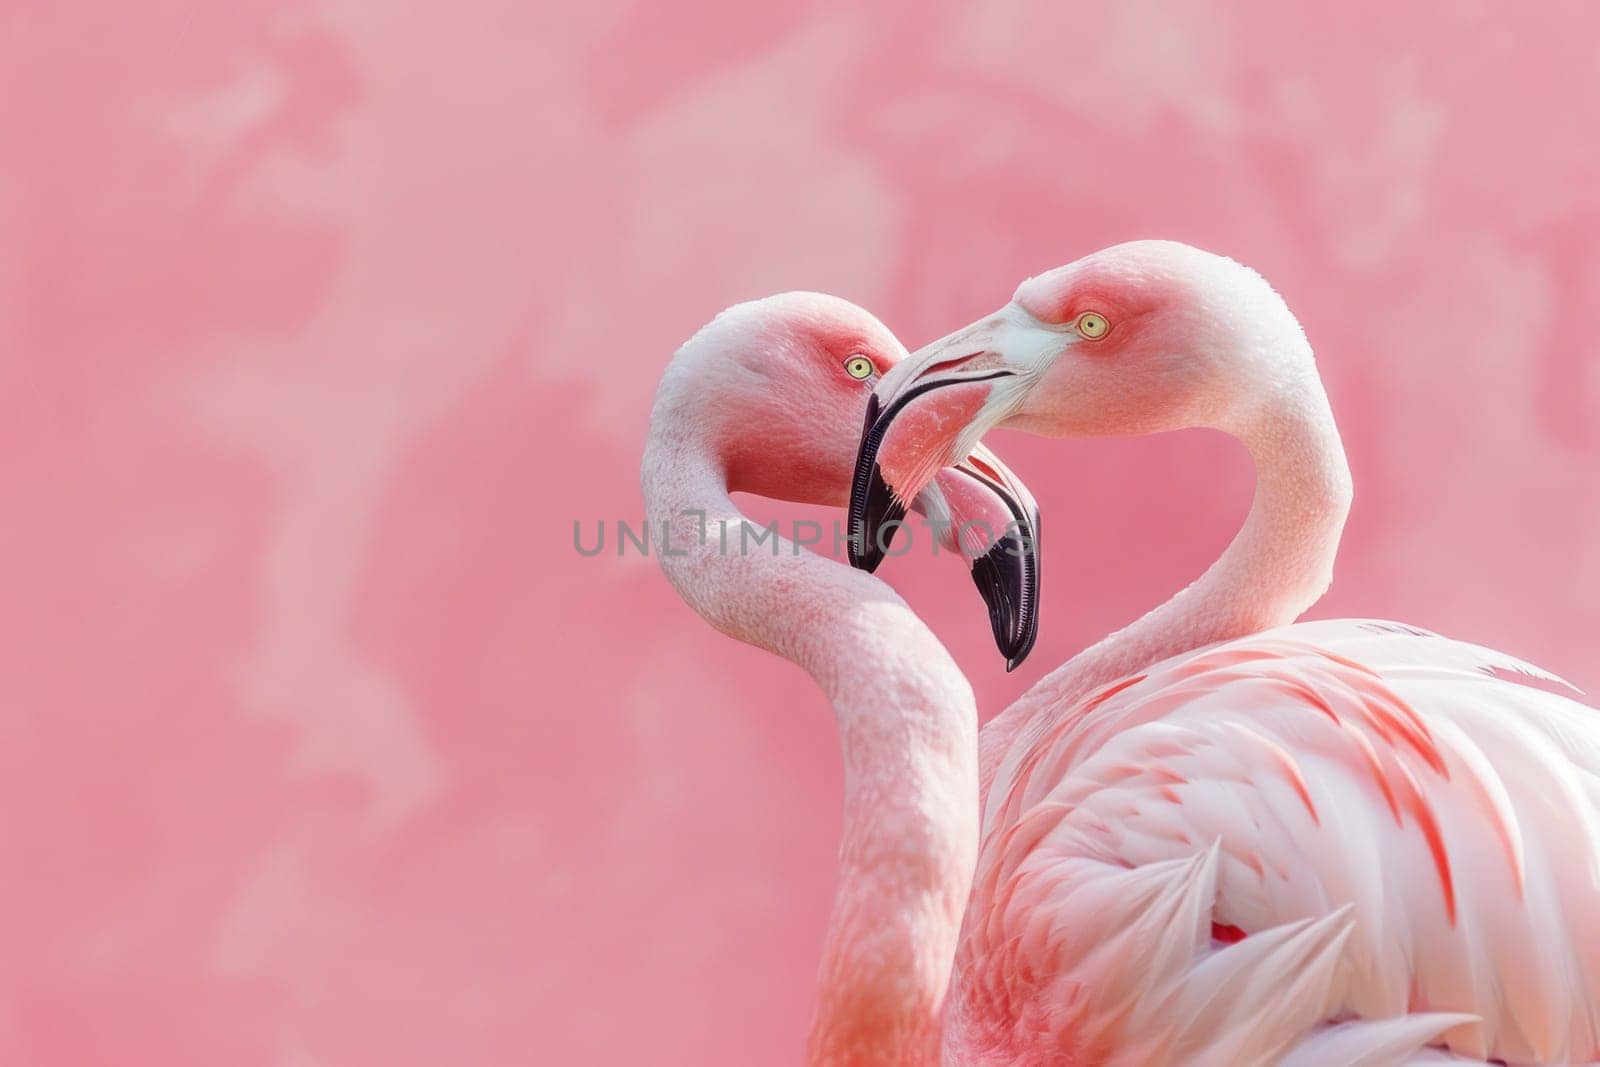 Romantic flamingos forming heart shape love, nature, relationship, pink background, wildlife, affection, art, animals, tropical, passion, wildlife, beautiful by Vichizh